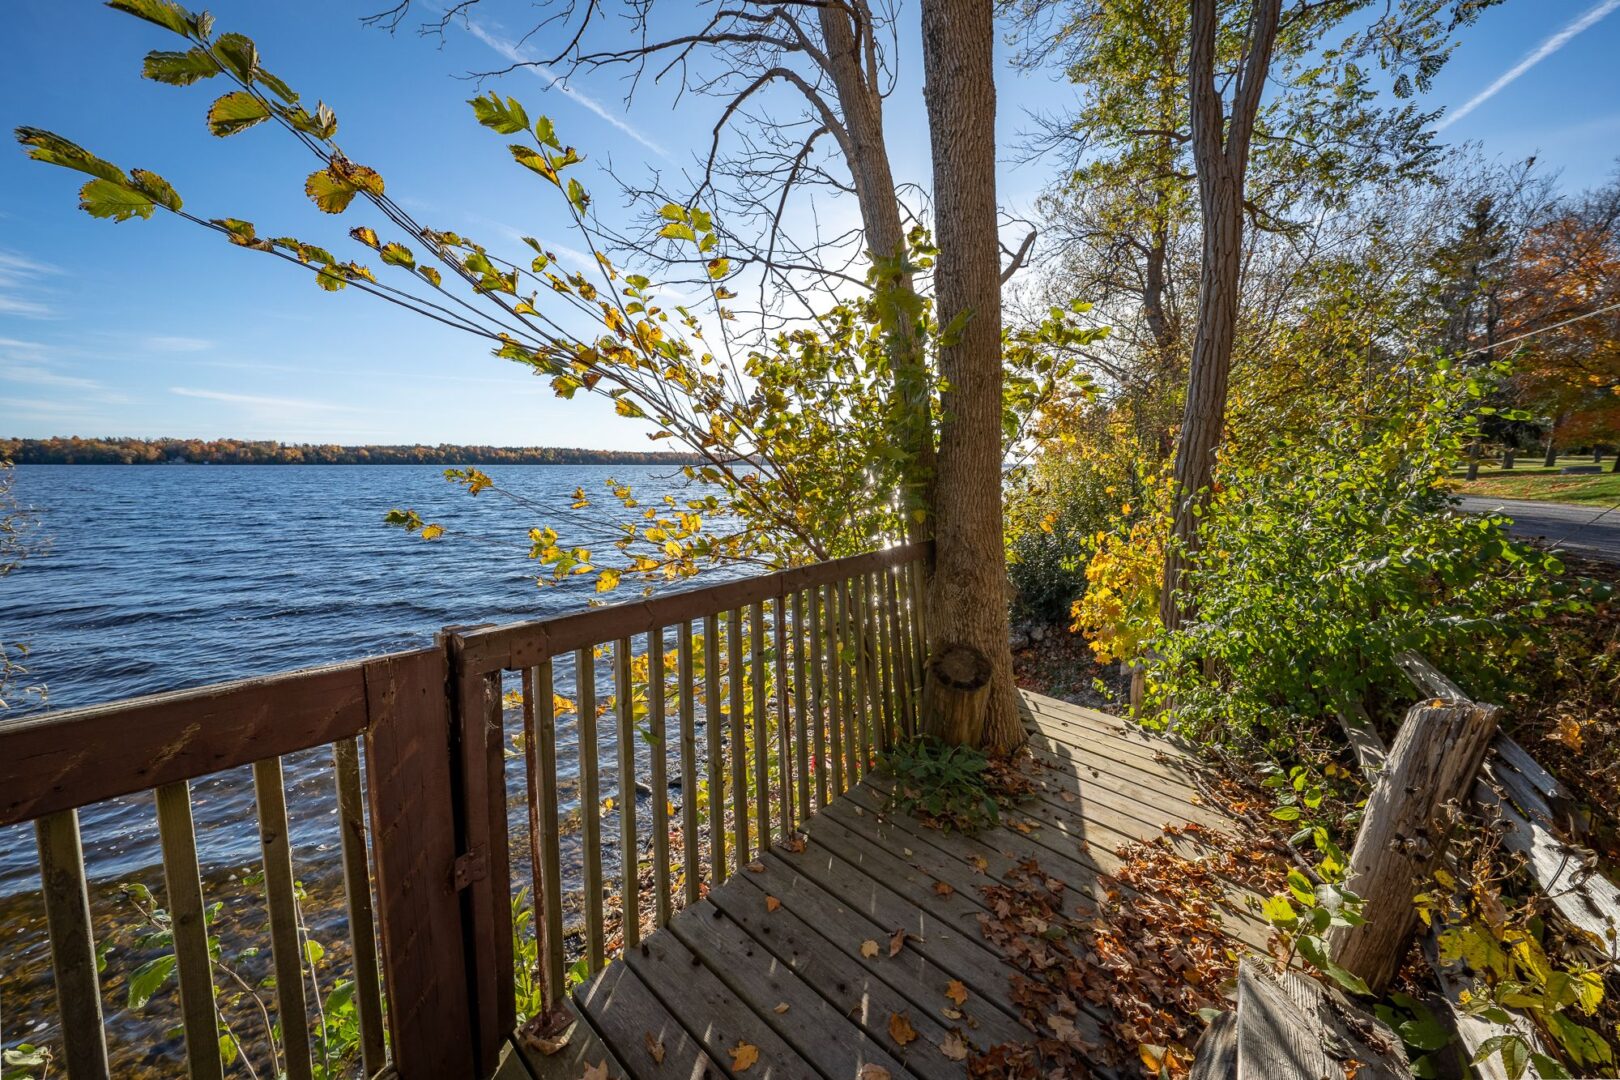 A wooden deck with a railing looks out over a stretch of lake.